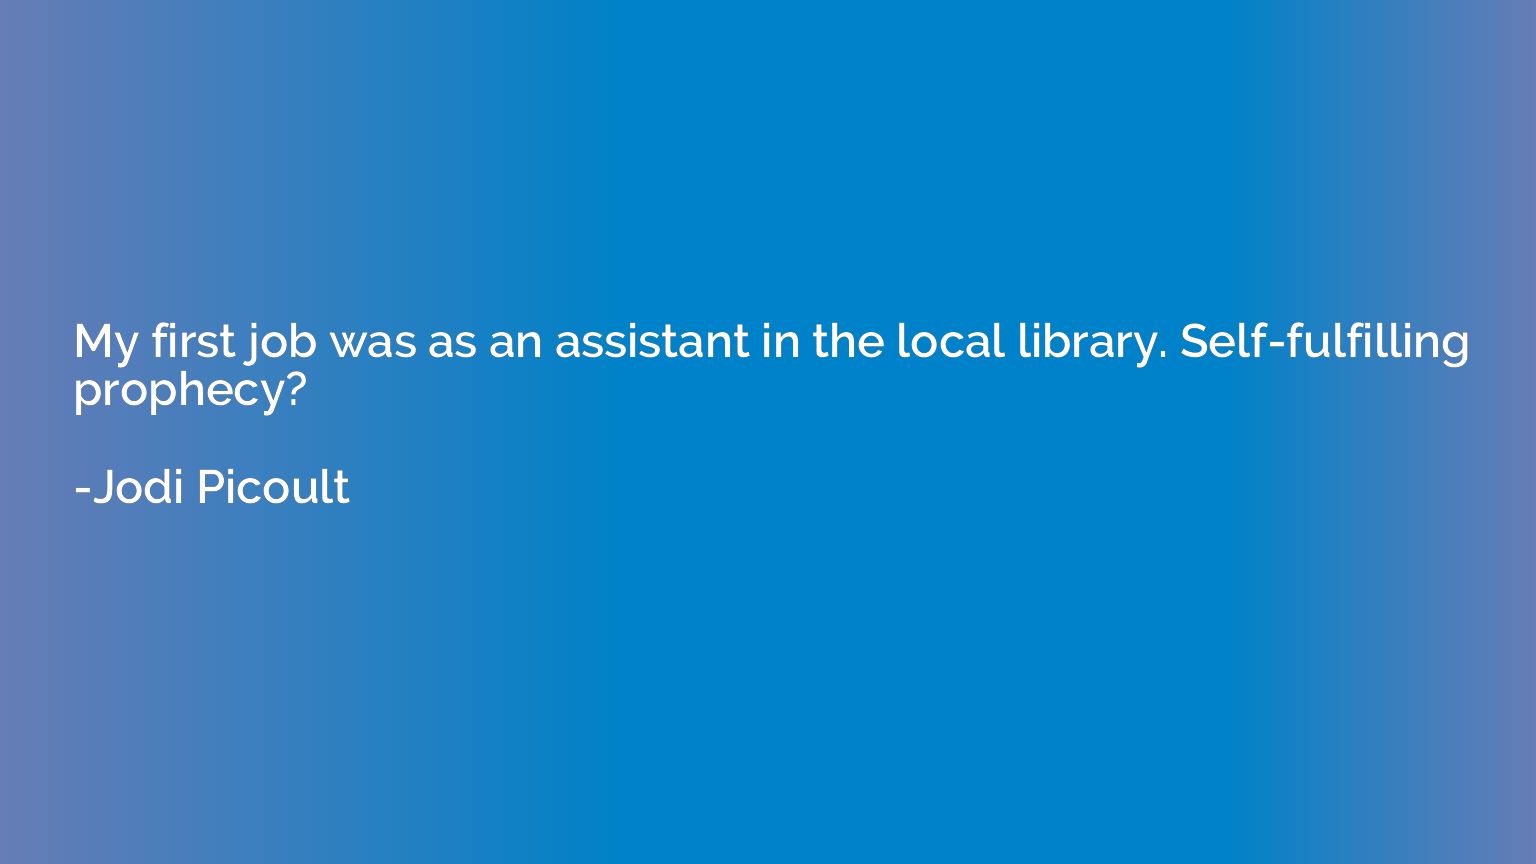 My first job was as an assistant in the local library. Self-